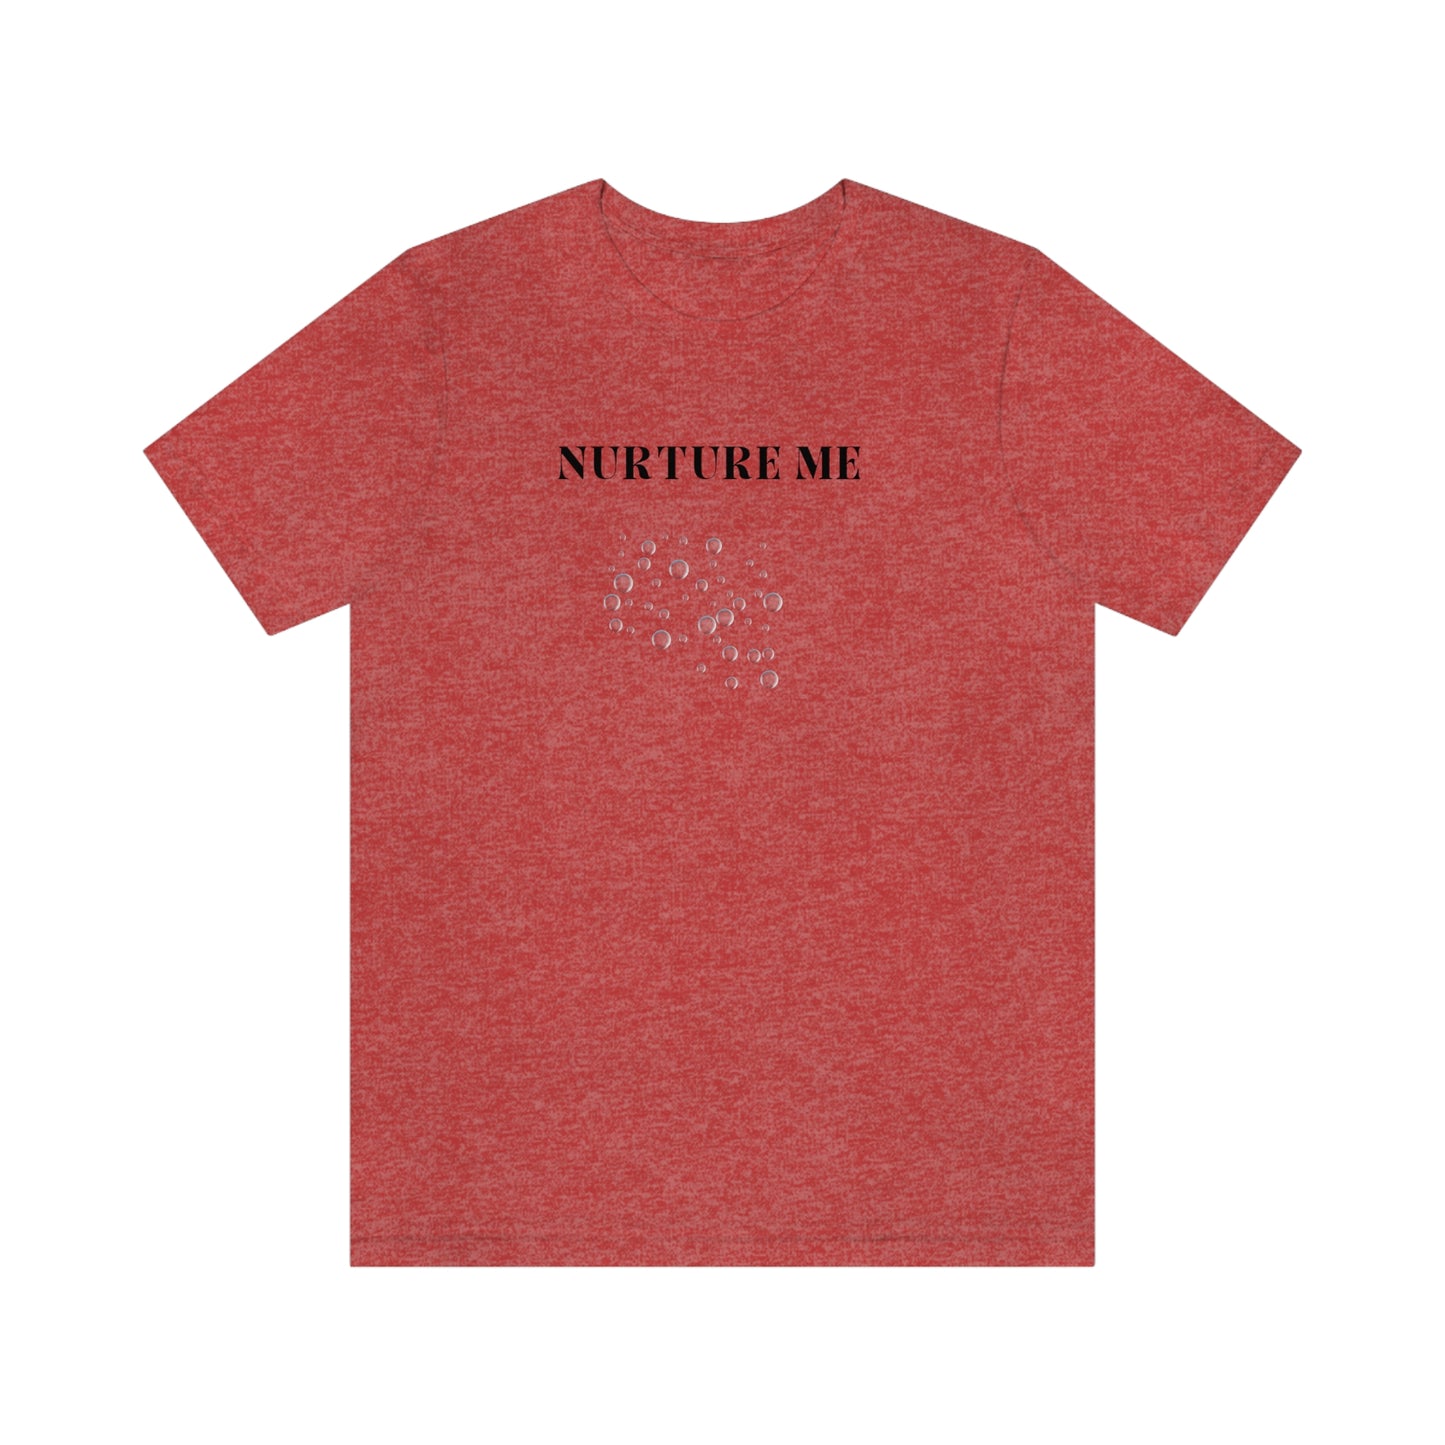 Nurture me t shirt t shirt with inspirational quotes t shirt gifts for friends